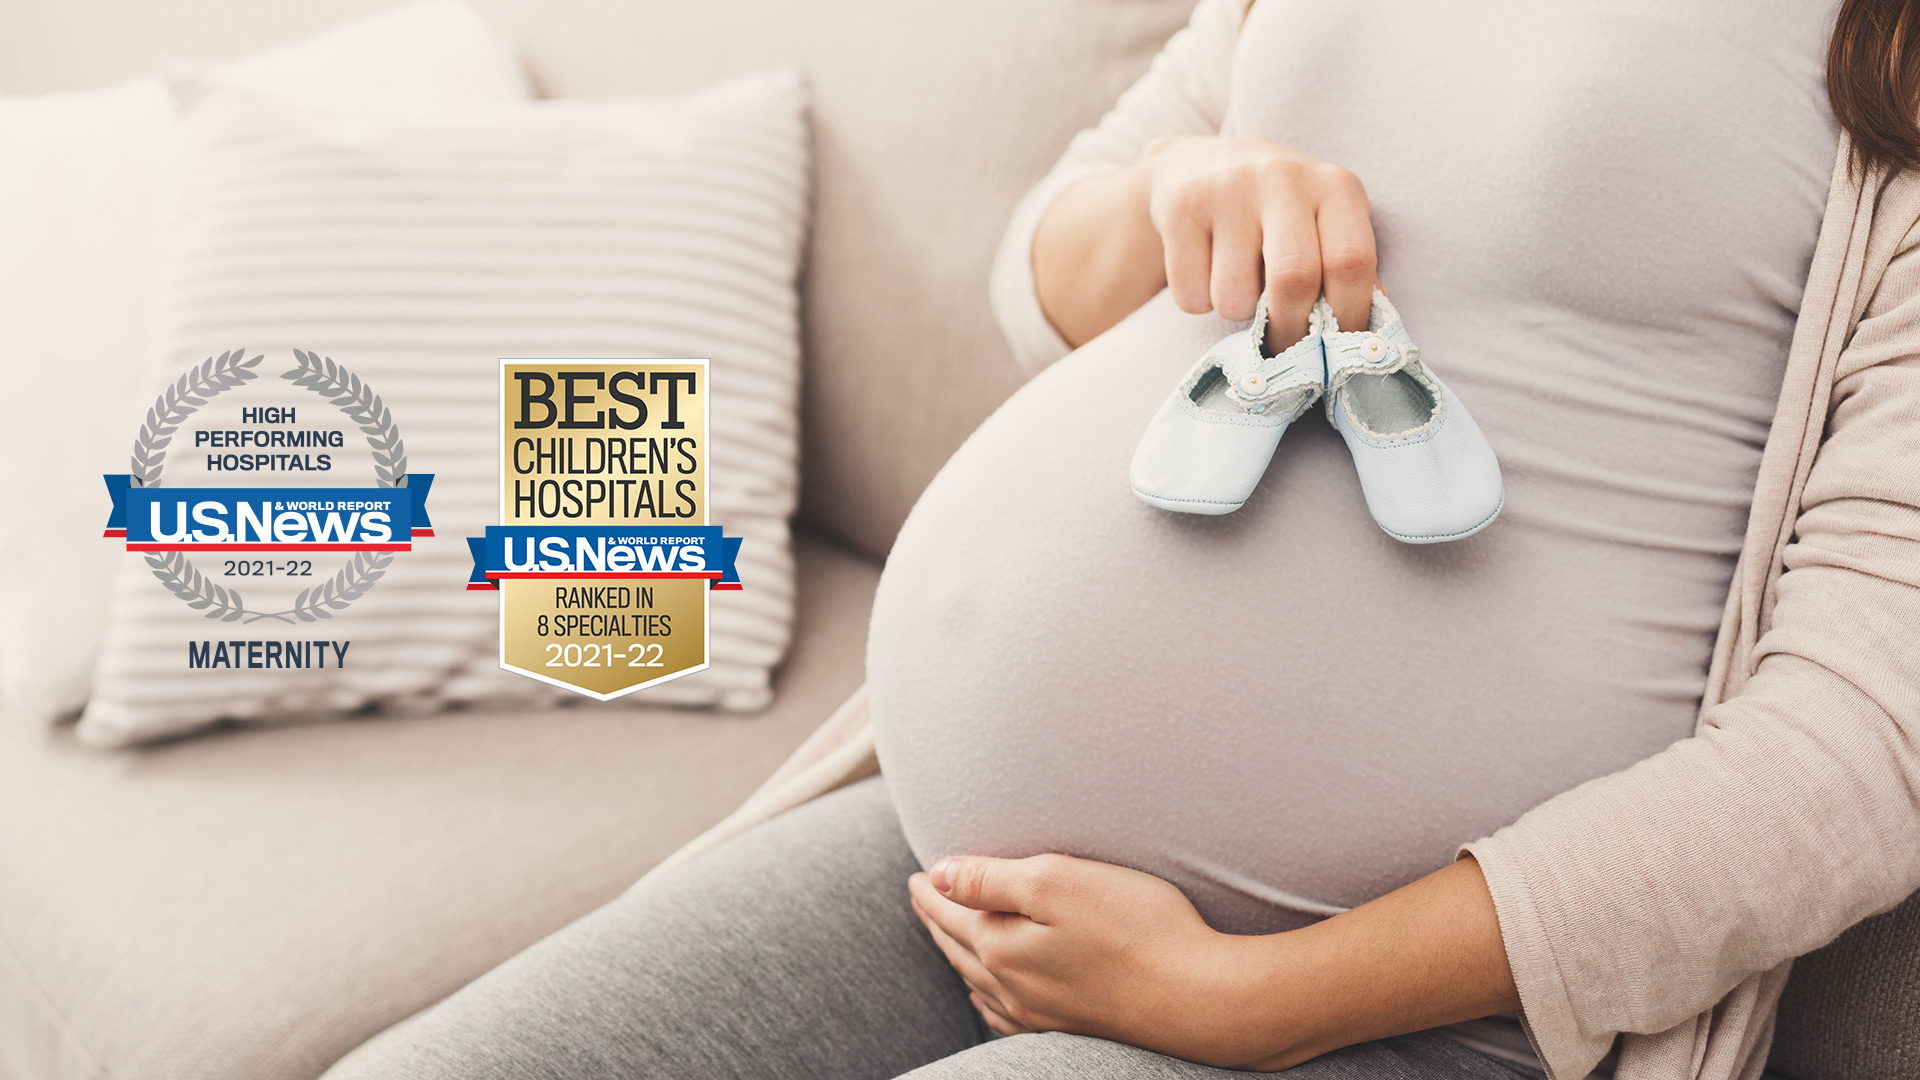 Atrium Health Cabarrus, Atrium Health Pineville and Atrium Health Union are being recognized by U.S. News & World Report in its inaugural “Best Maternity Hospitals” awards.